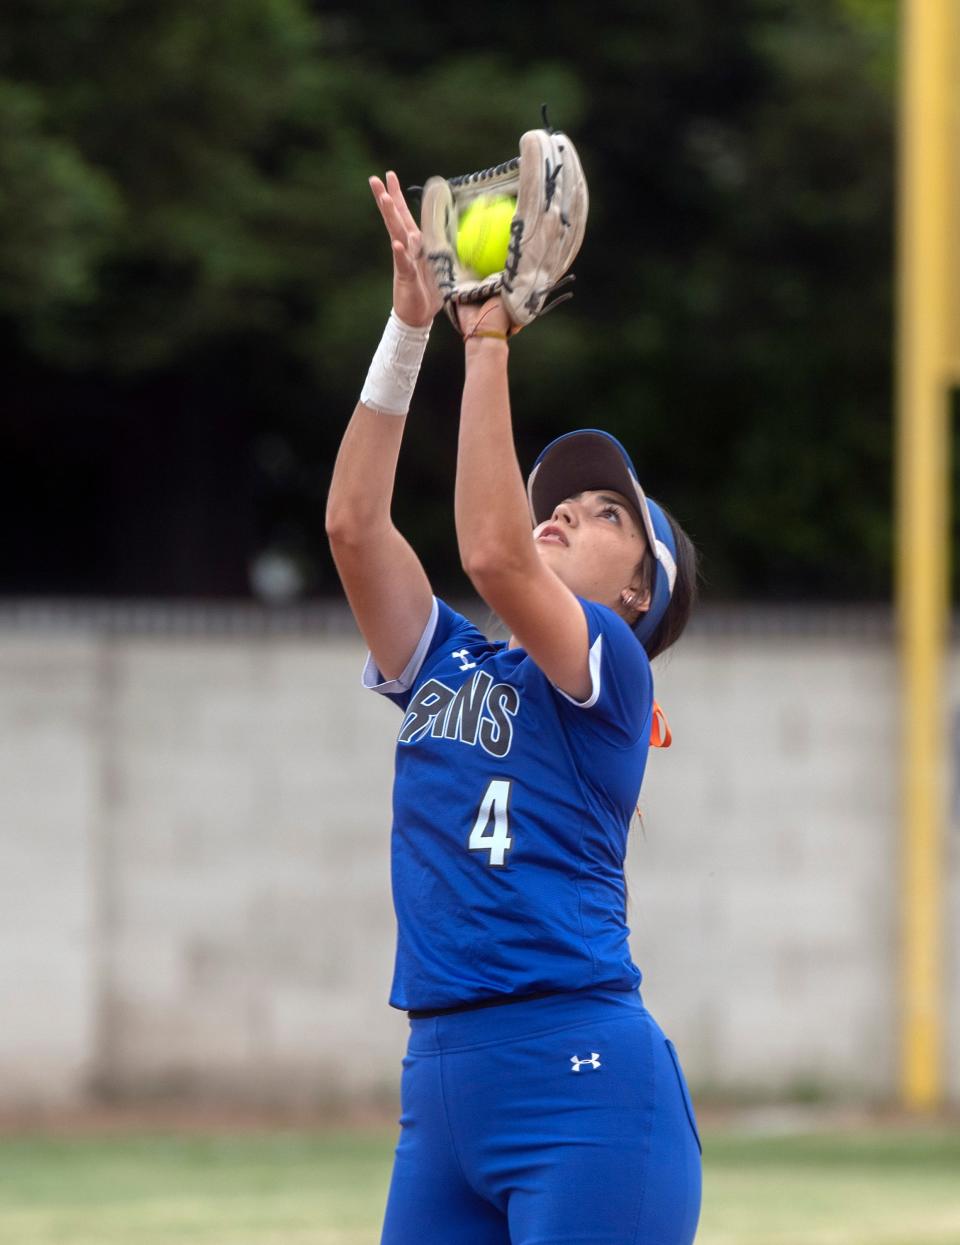 Bear Creek's Gianna Galli catches a pop fly during a varsity softball game against Stagg at Bear Creek in Stockton on Wednesday, May 3, 2023.  Bear Creek won 14-4.